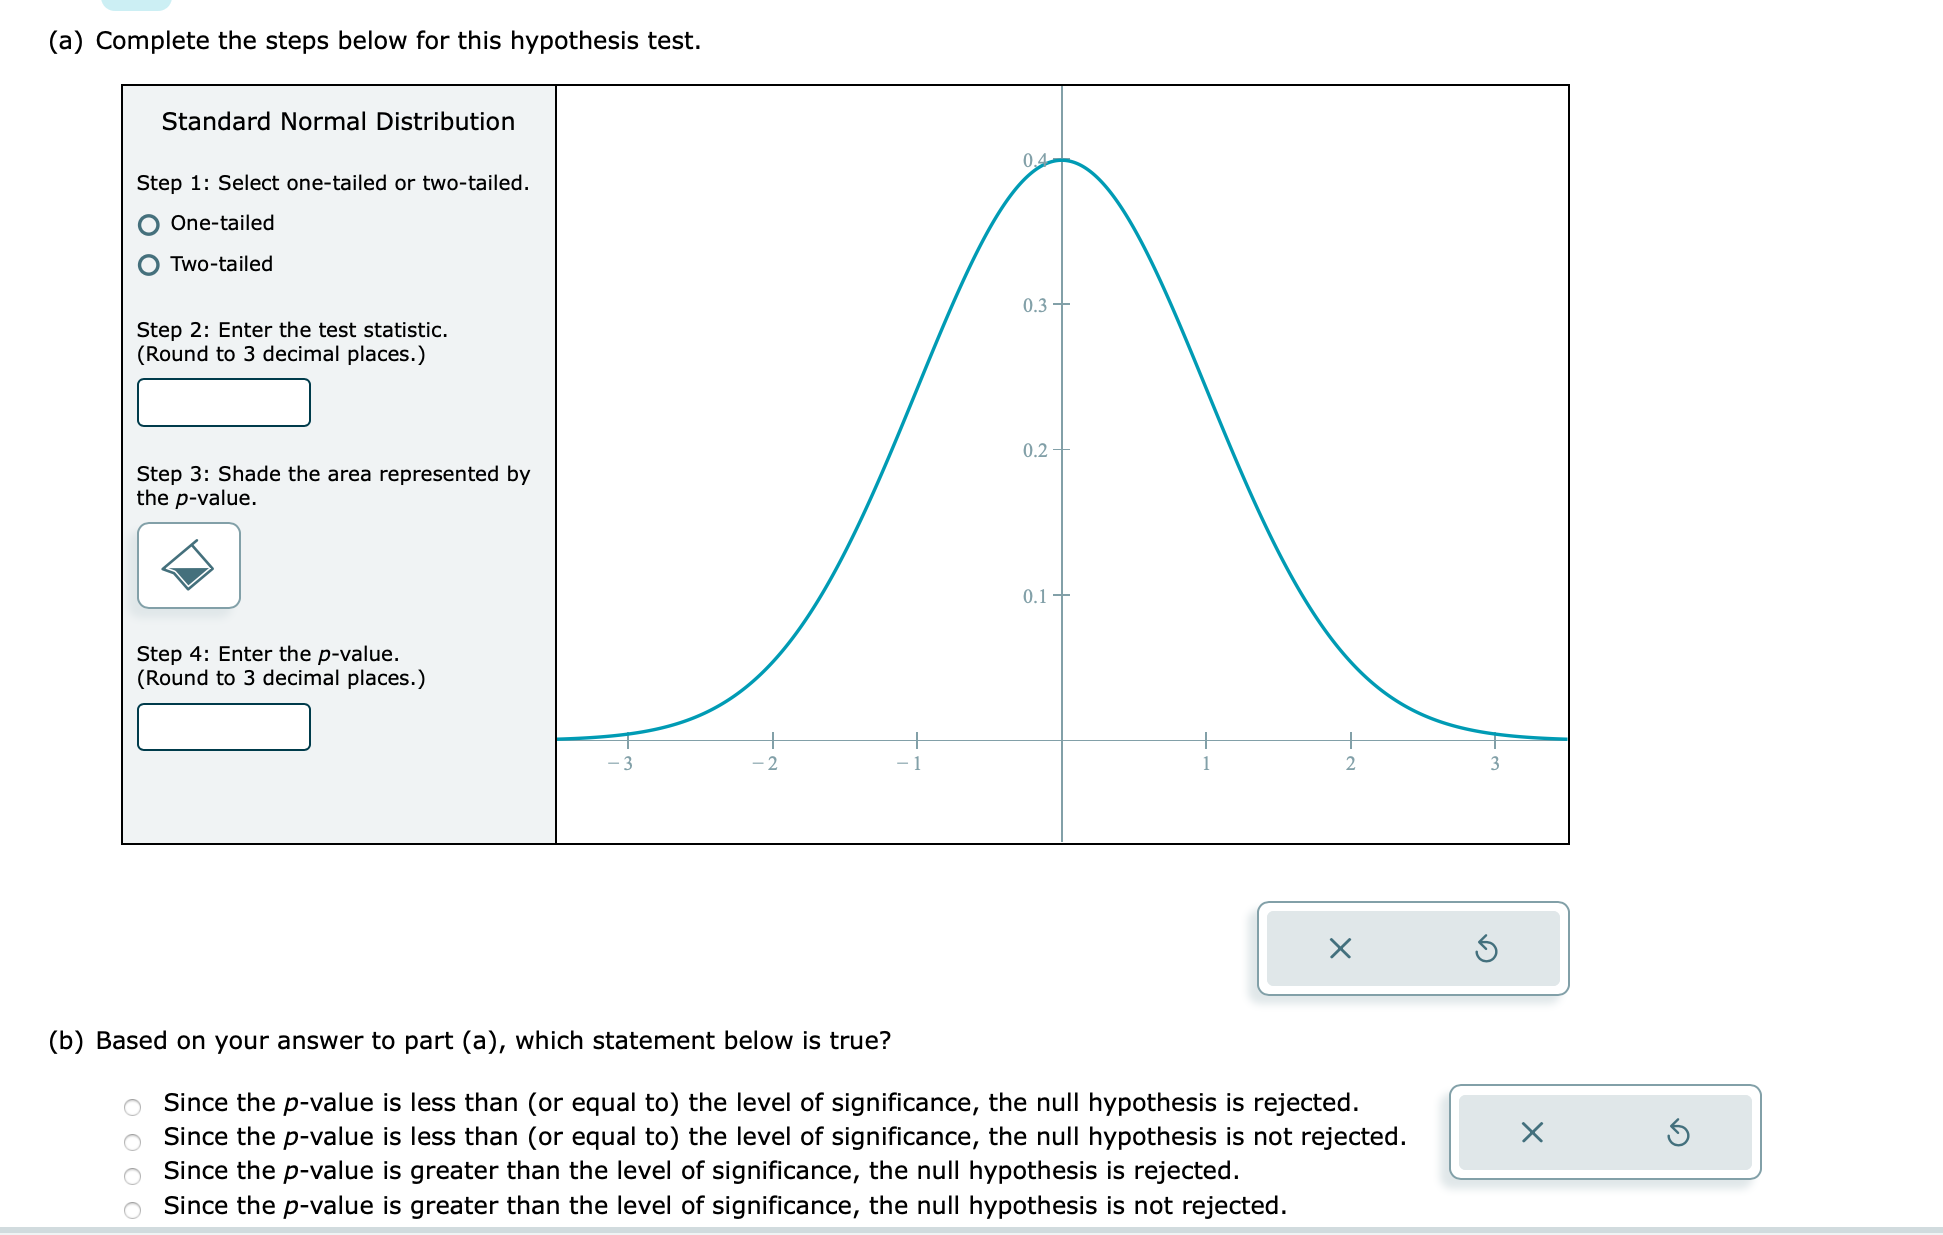 (a) Complete the steps below for this hypothesis test.
Standard Normal Distribution
Step 1: Select one-tailed or two-tailed.
One-tailed
Two-tailed
Step 2: Enter the test statistic.
(Round to 3 decimal places.)
Step 3: Shade the area represented by
the p-value.
Step 4: Enter the p-value.
(Round to 3 decimal places.)
OOOO
-2
0.4
0.3
0.2
0.1-
1
2
X
(b) Based on your answer to part (a), which statement below is true?
Since the p-value is less than (or equal to) the level of significance, the null hypothesis is rejected.
Since the p-value is less than (or equal to) the level of significance, the null hypothesis is not rejected.
Since the p-value is greater than the level of significance, the null hypothesis is rejected.
Since the p-value is greater than the level of significance, the null hypothesis is not rejected.
3
x